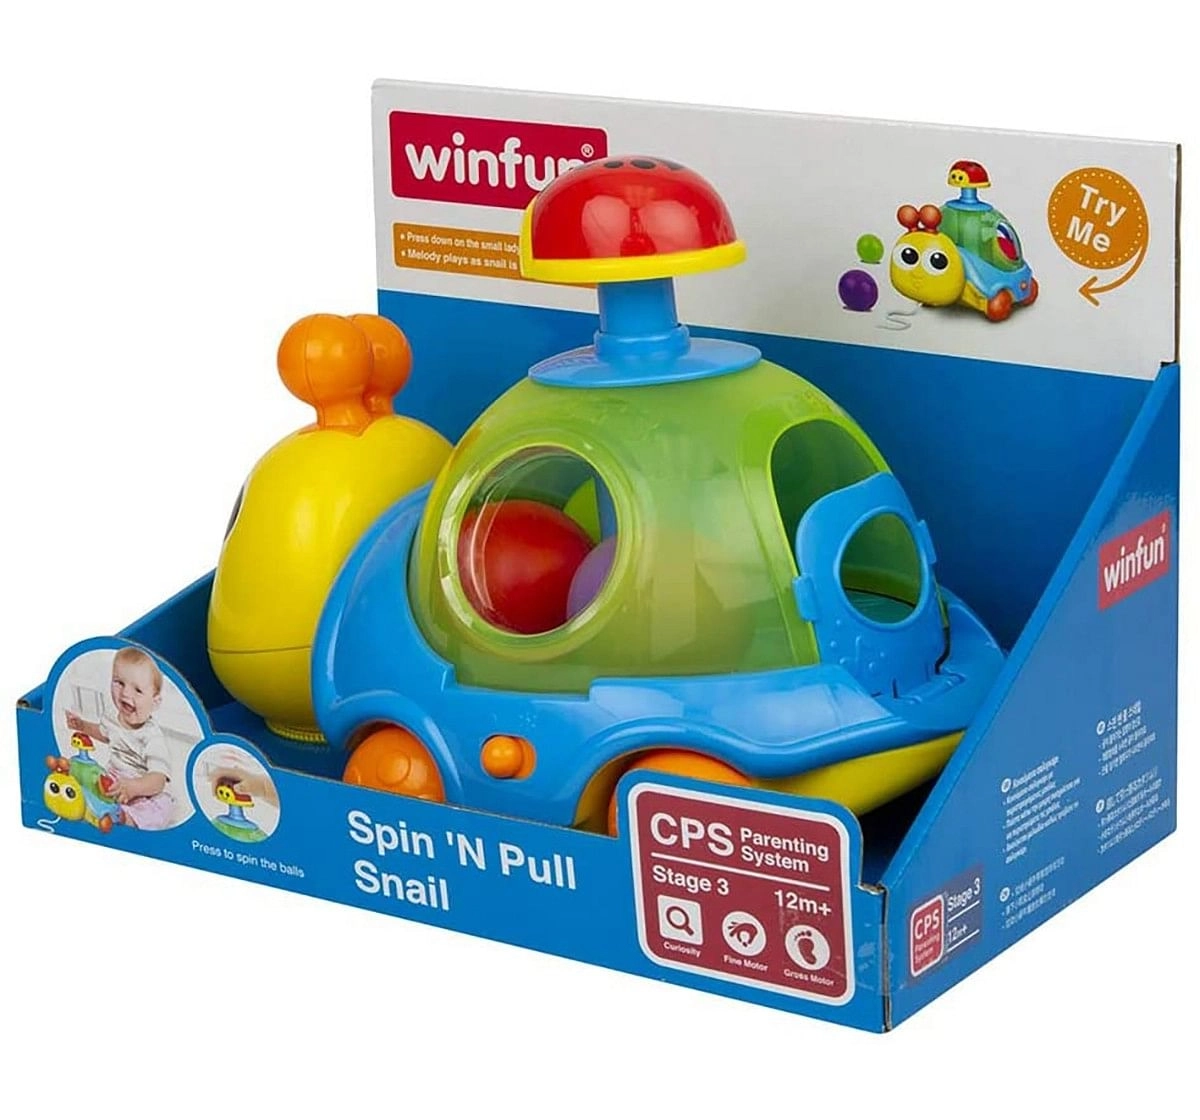 Winfun - Spin 'N Pull Snail Early Learner Toys for Kids age 12M+ 